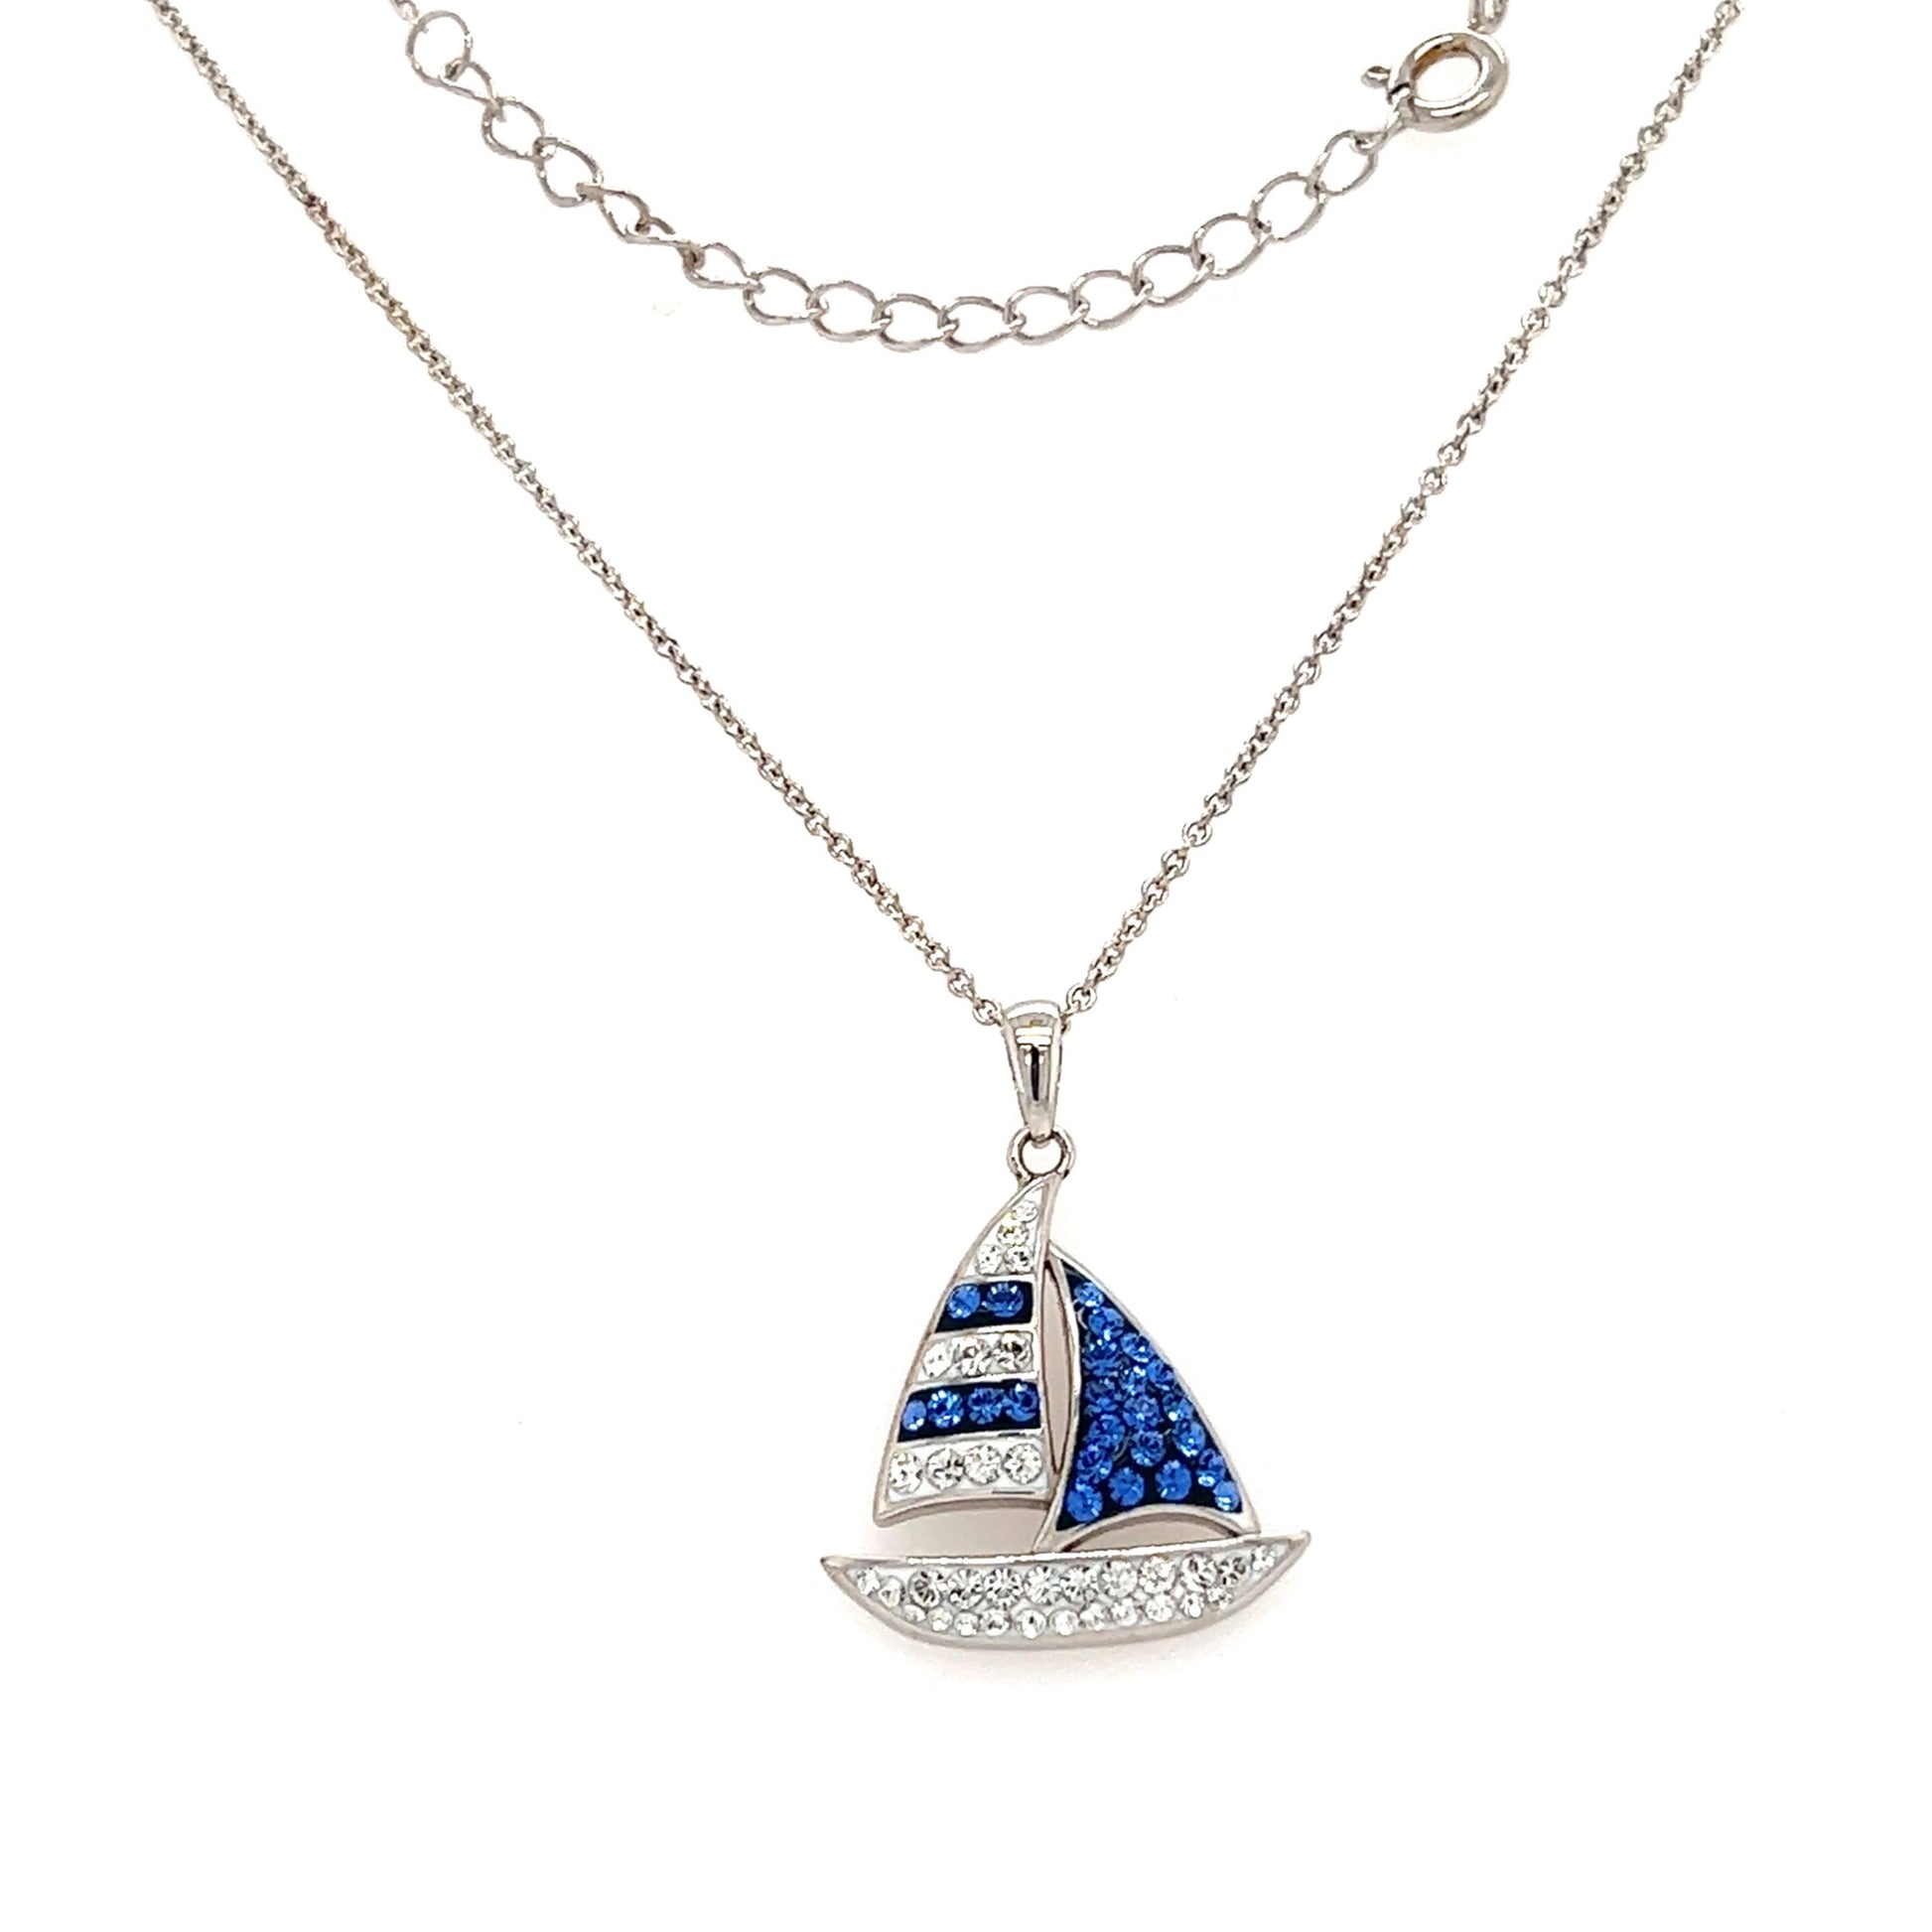 Blue Sailboat Necklace with Blue and White Crystals in Sterling Silver. Full Necklace View